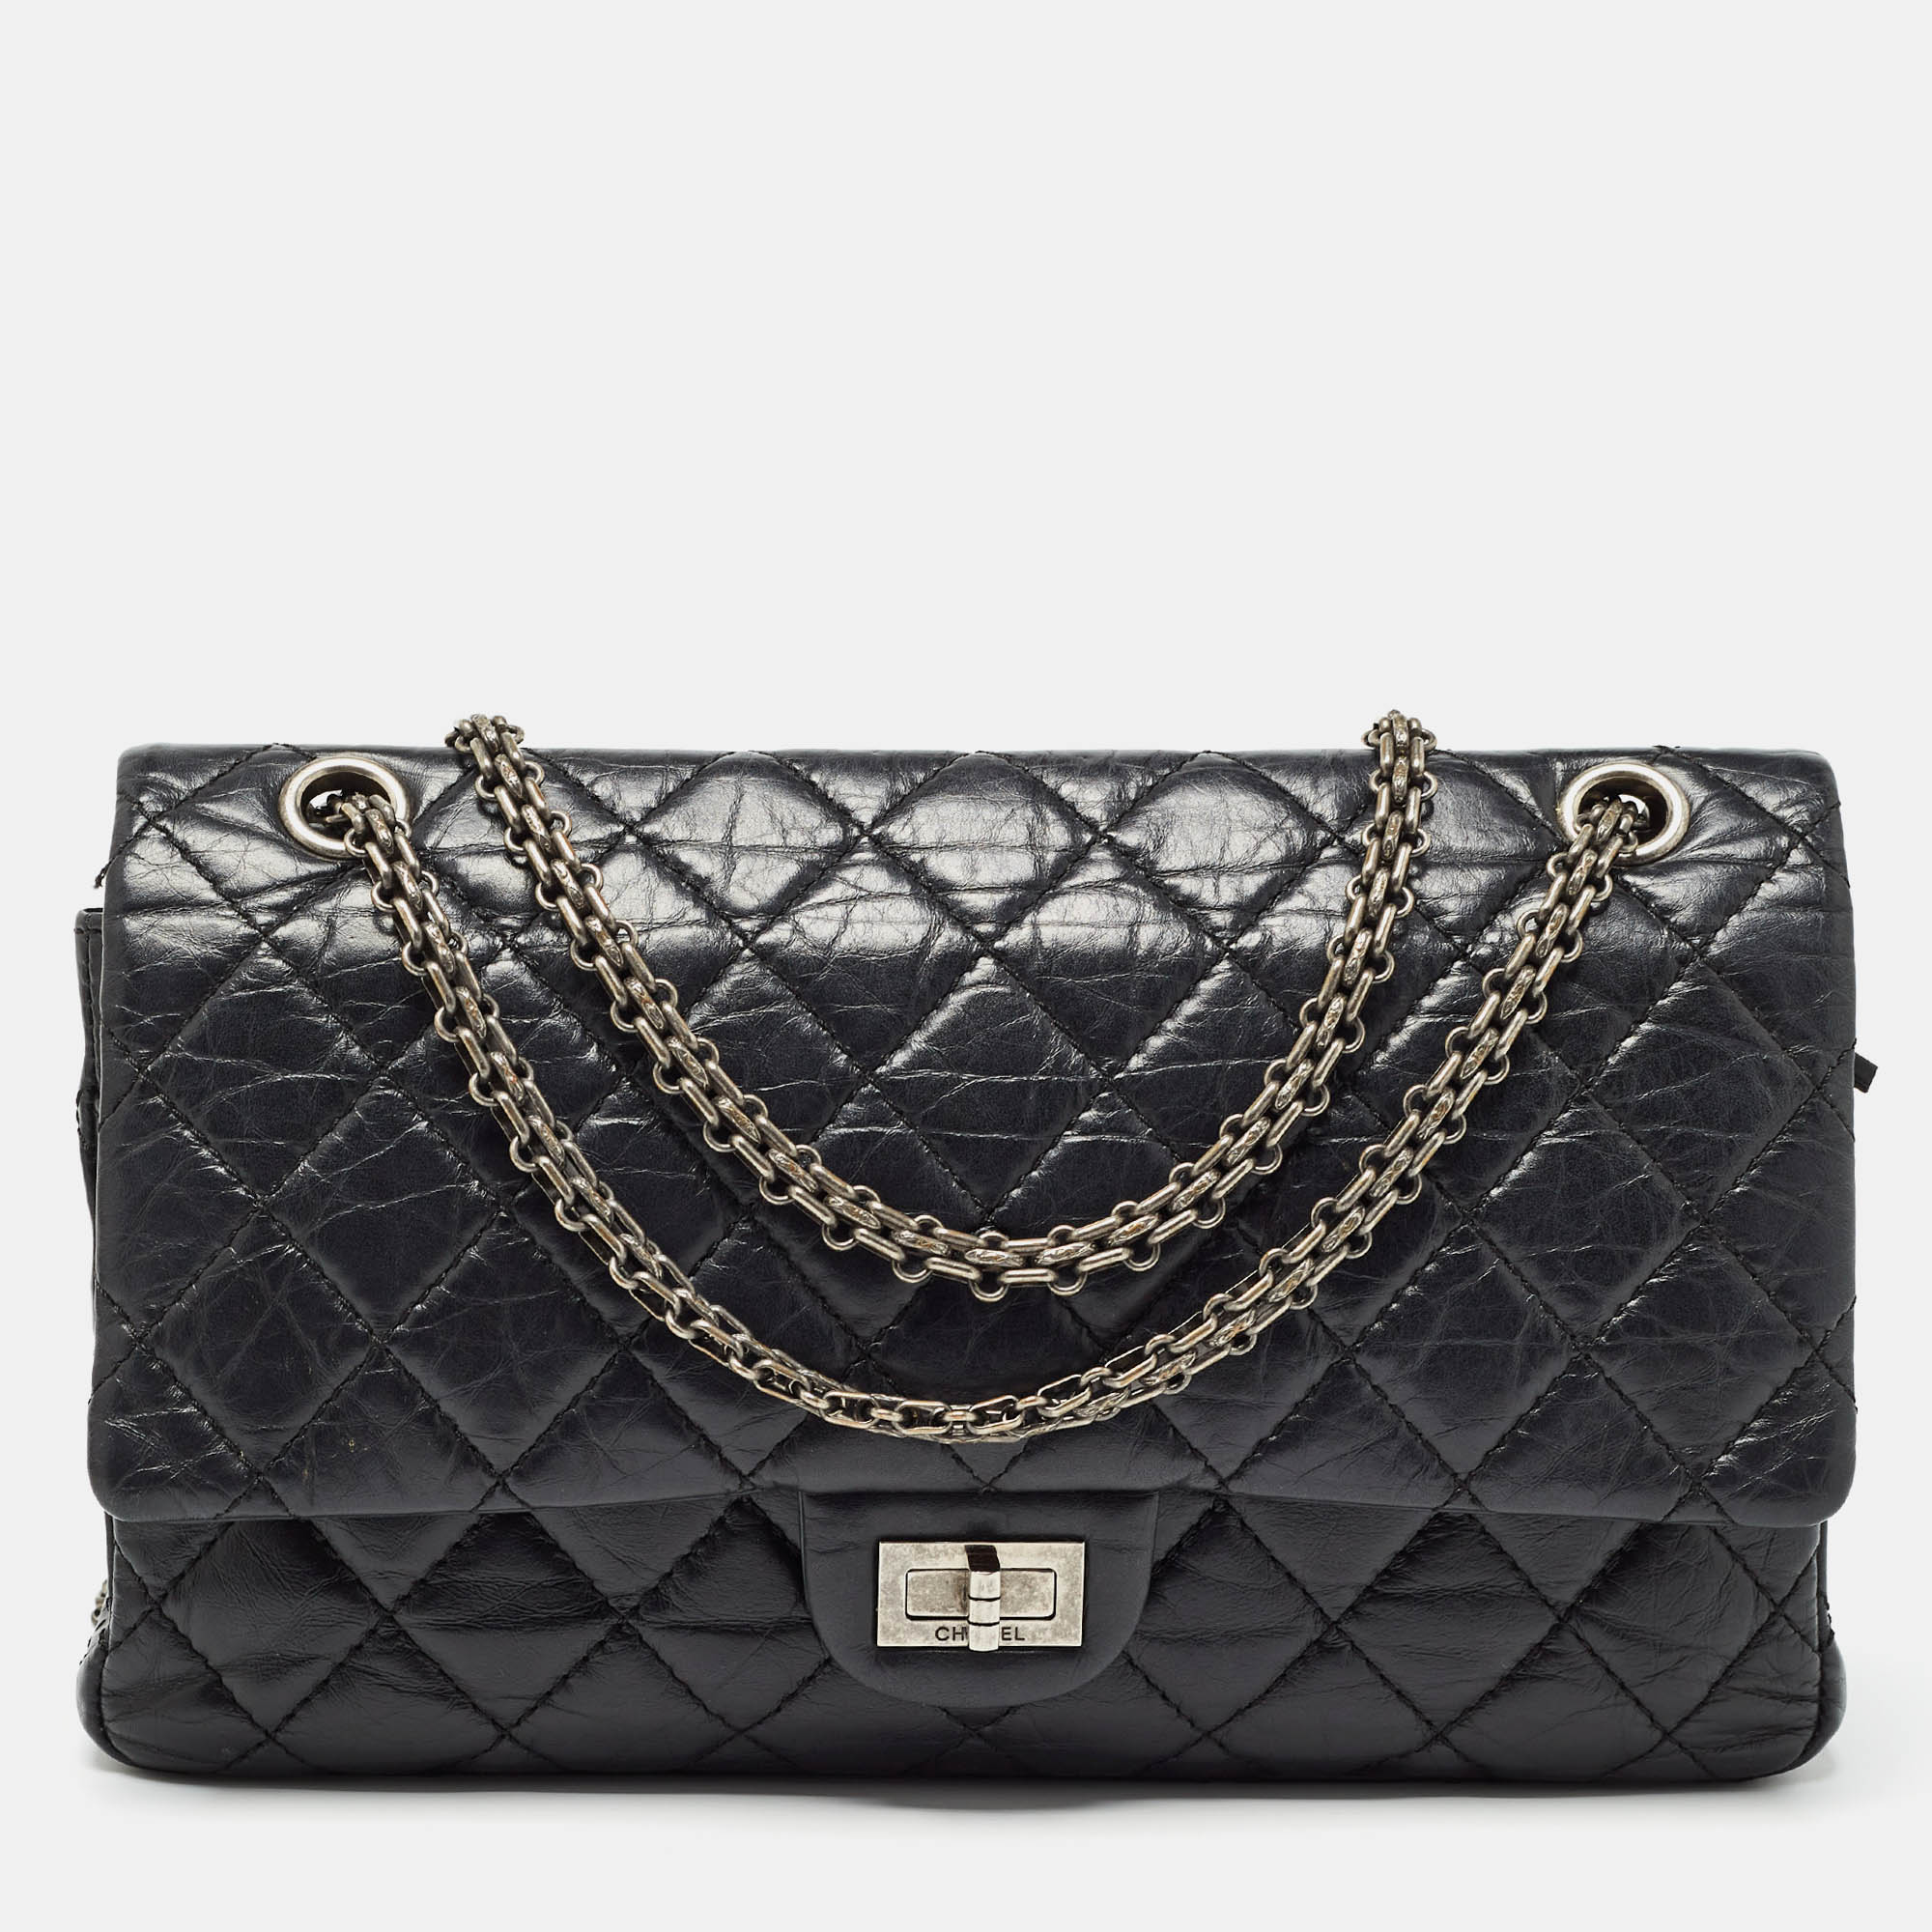 

Chanel Black Quilted Aged Leather Reissue 2.55 Classic 226 Flap Bag